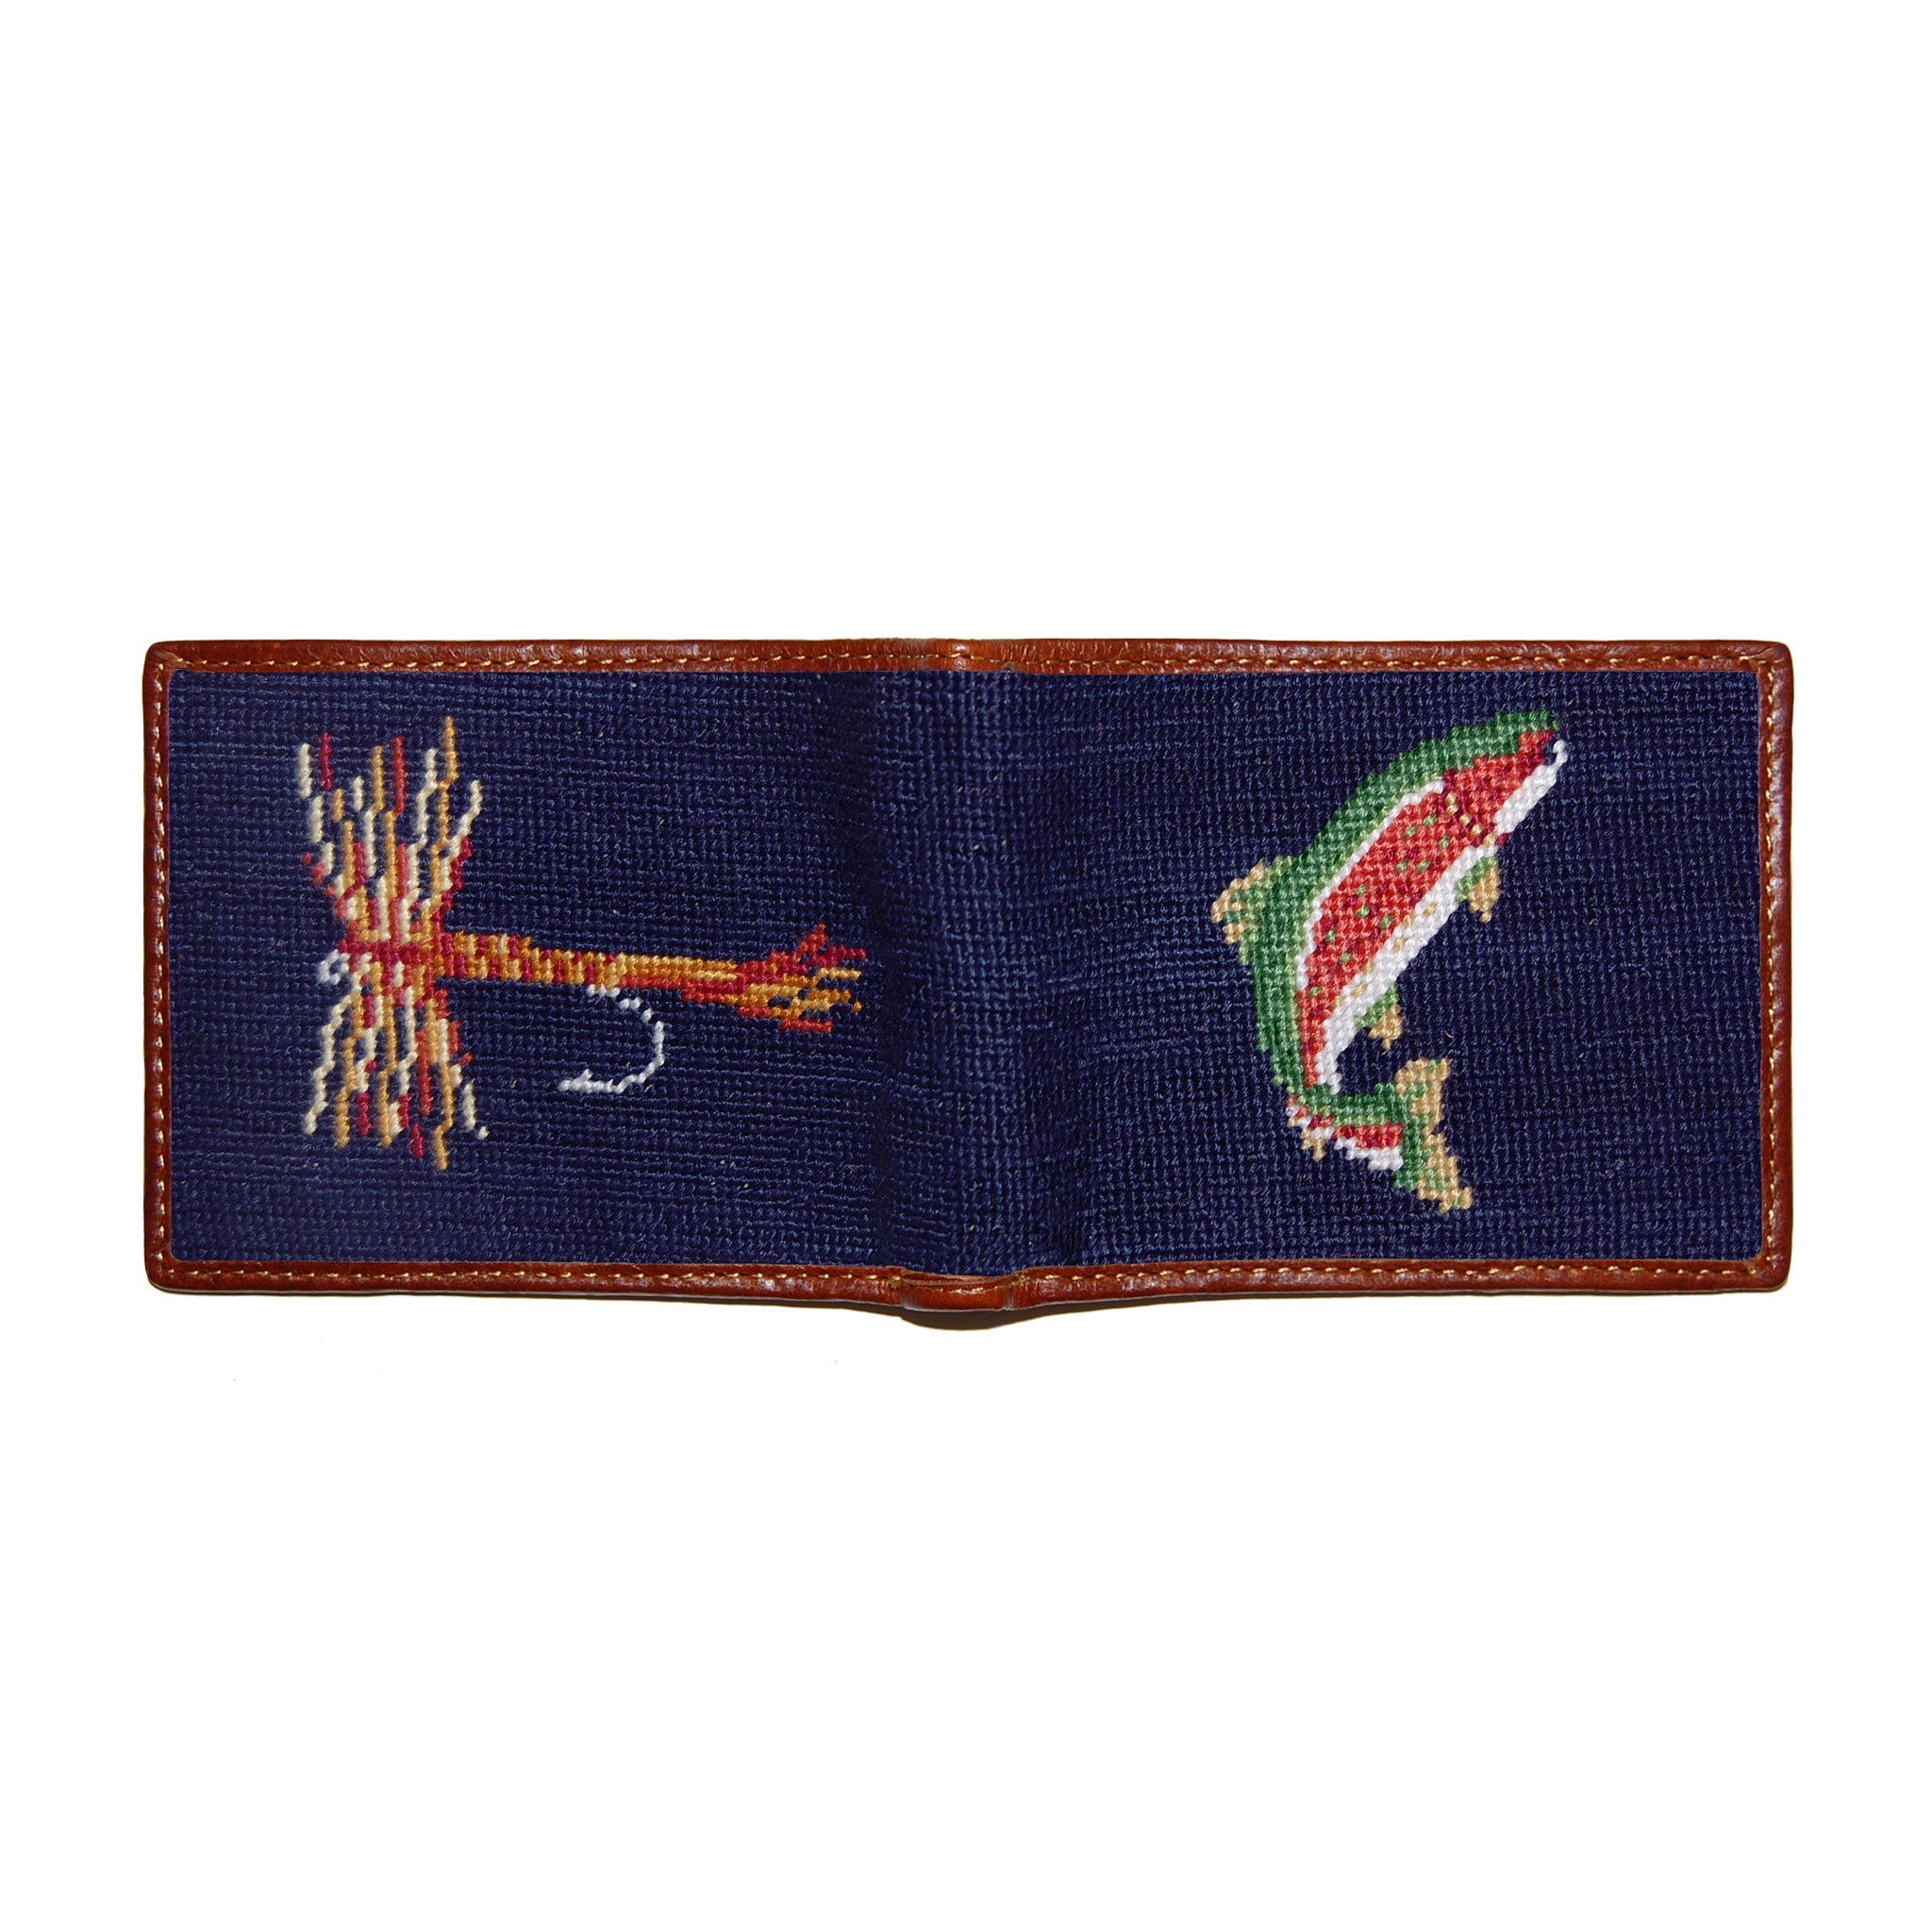 Smathers and Branson Trout And Fly Dark Navy Needlepoint Bi-Fold Wallet  